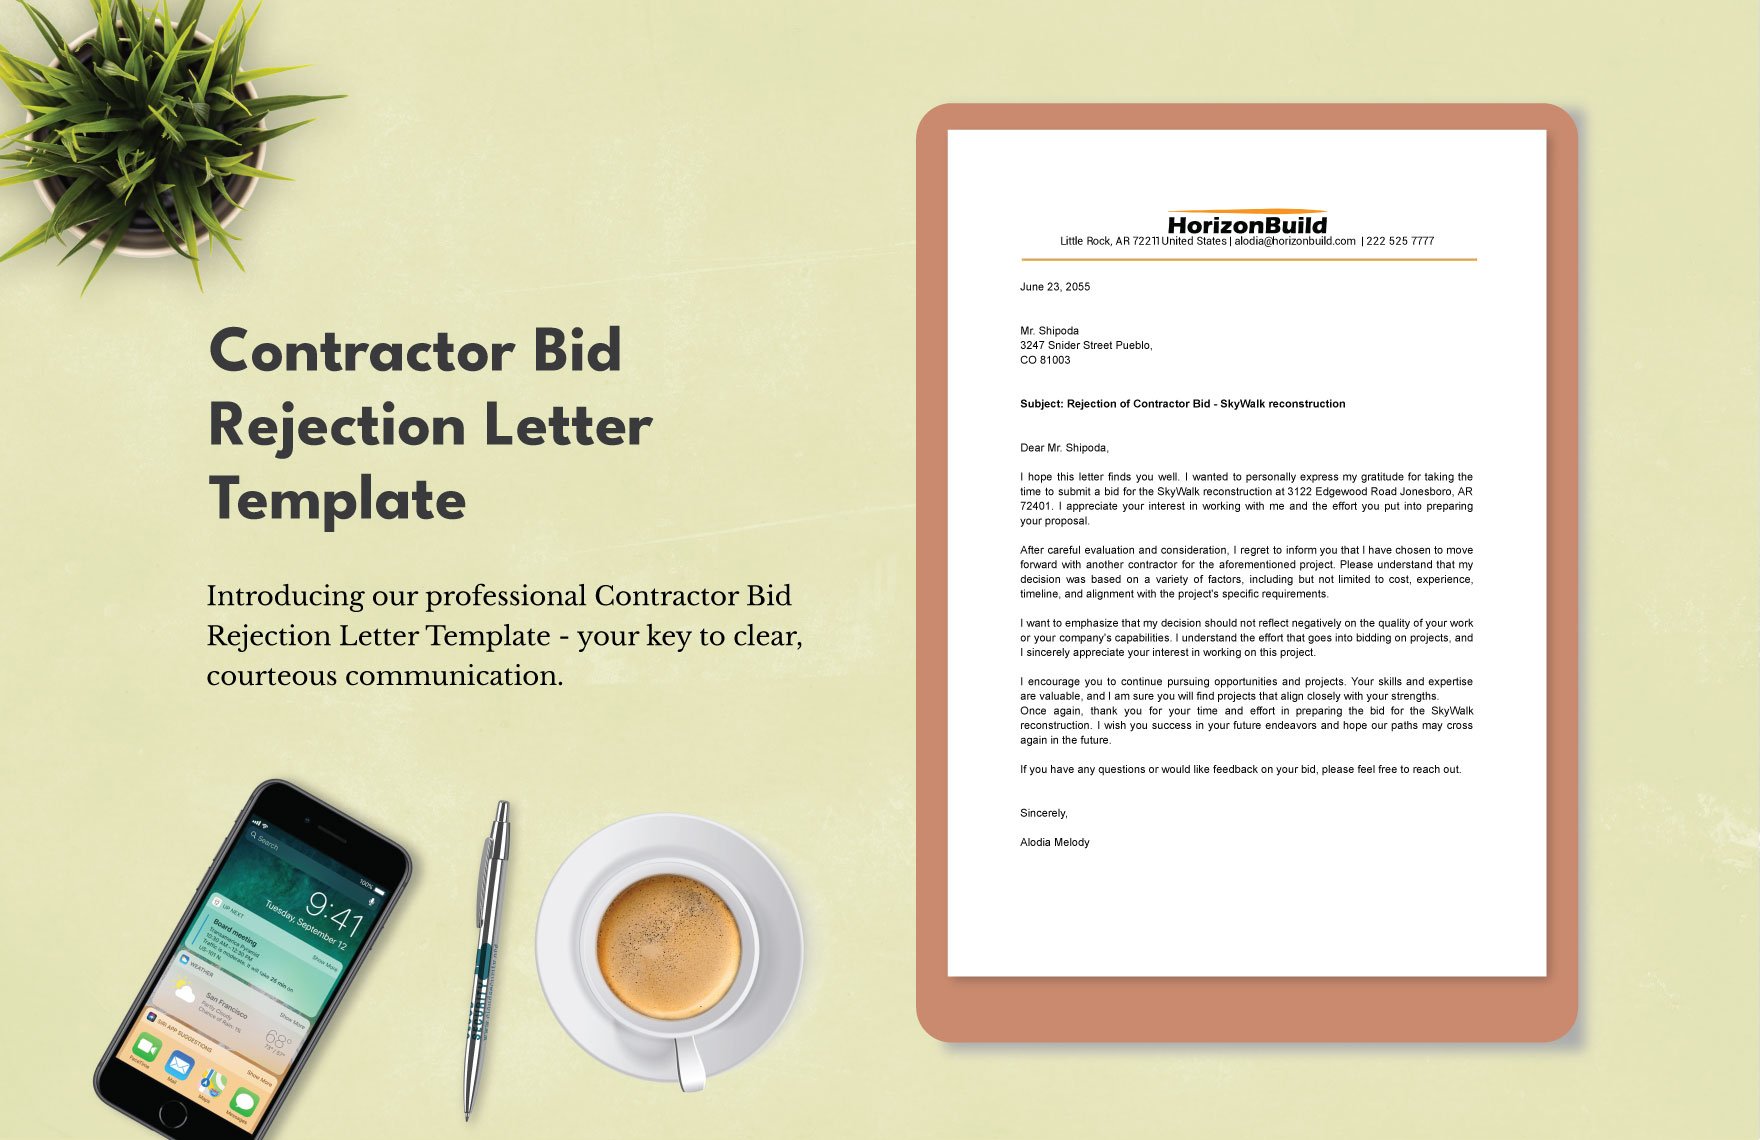 Contractor Bid Rejection Letter Template in Word, Google Docs, PDF